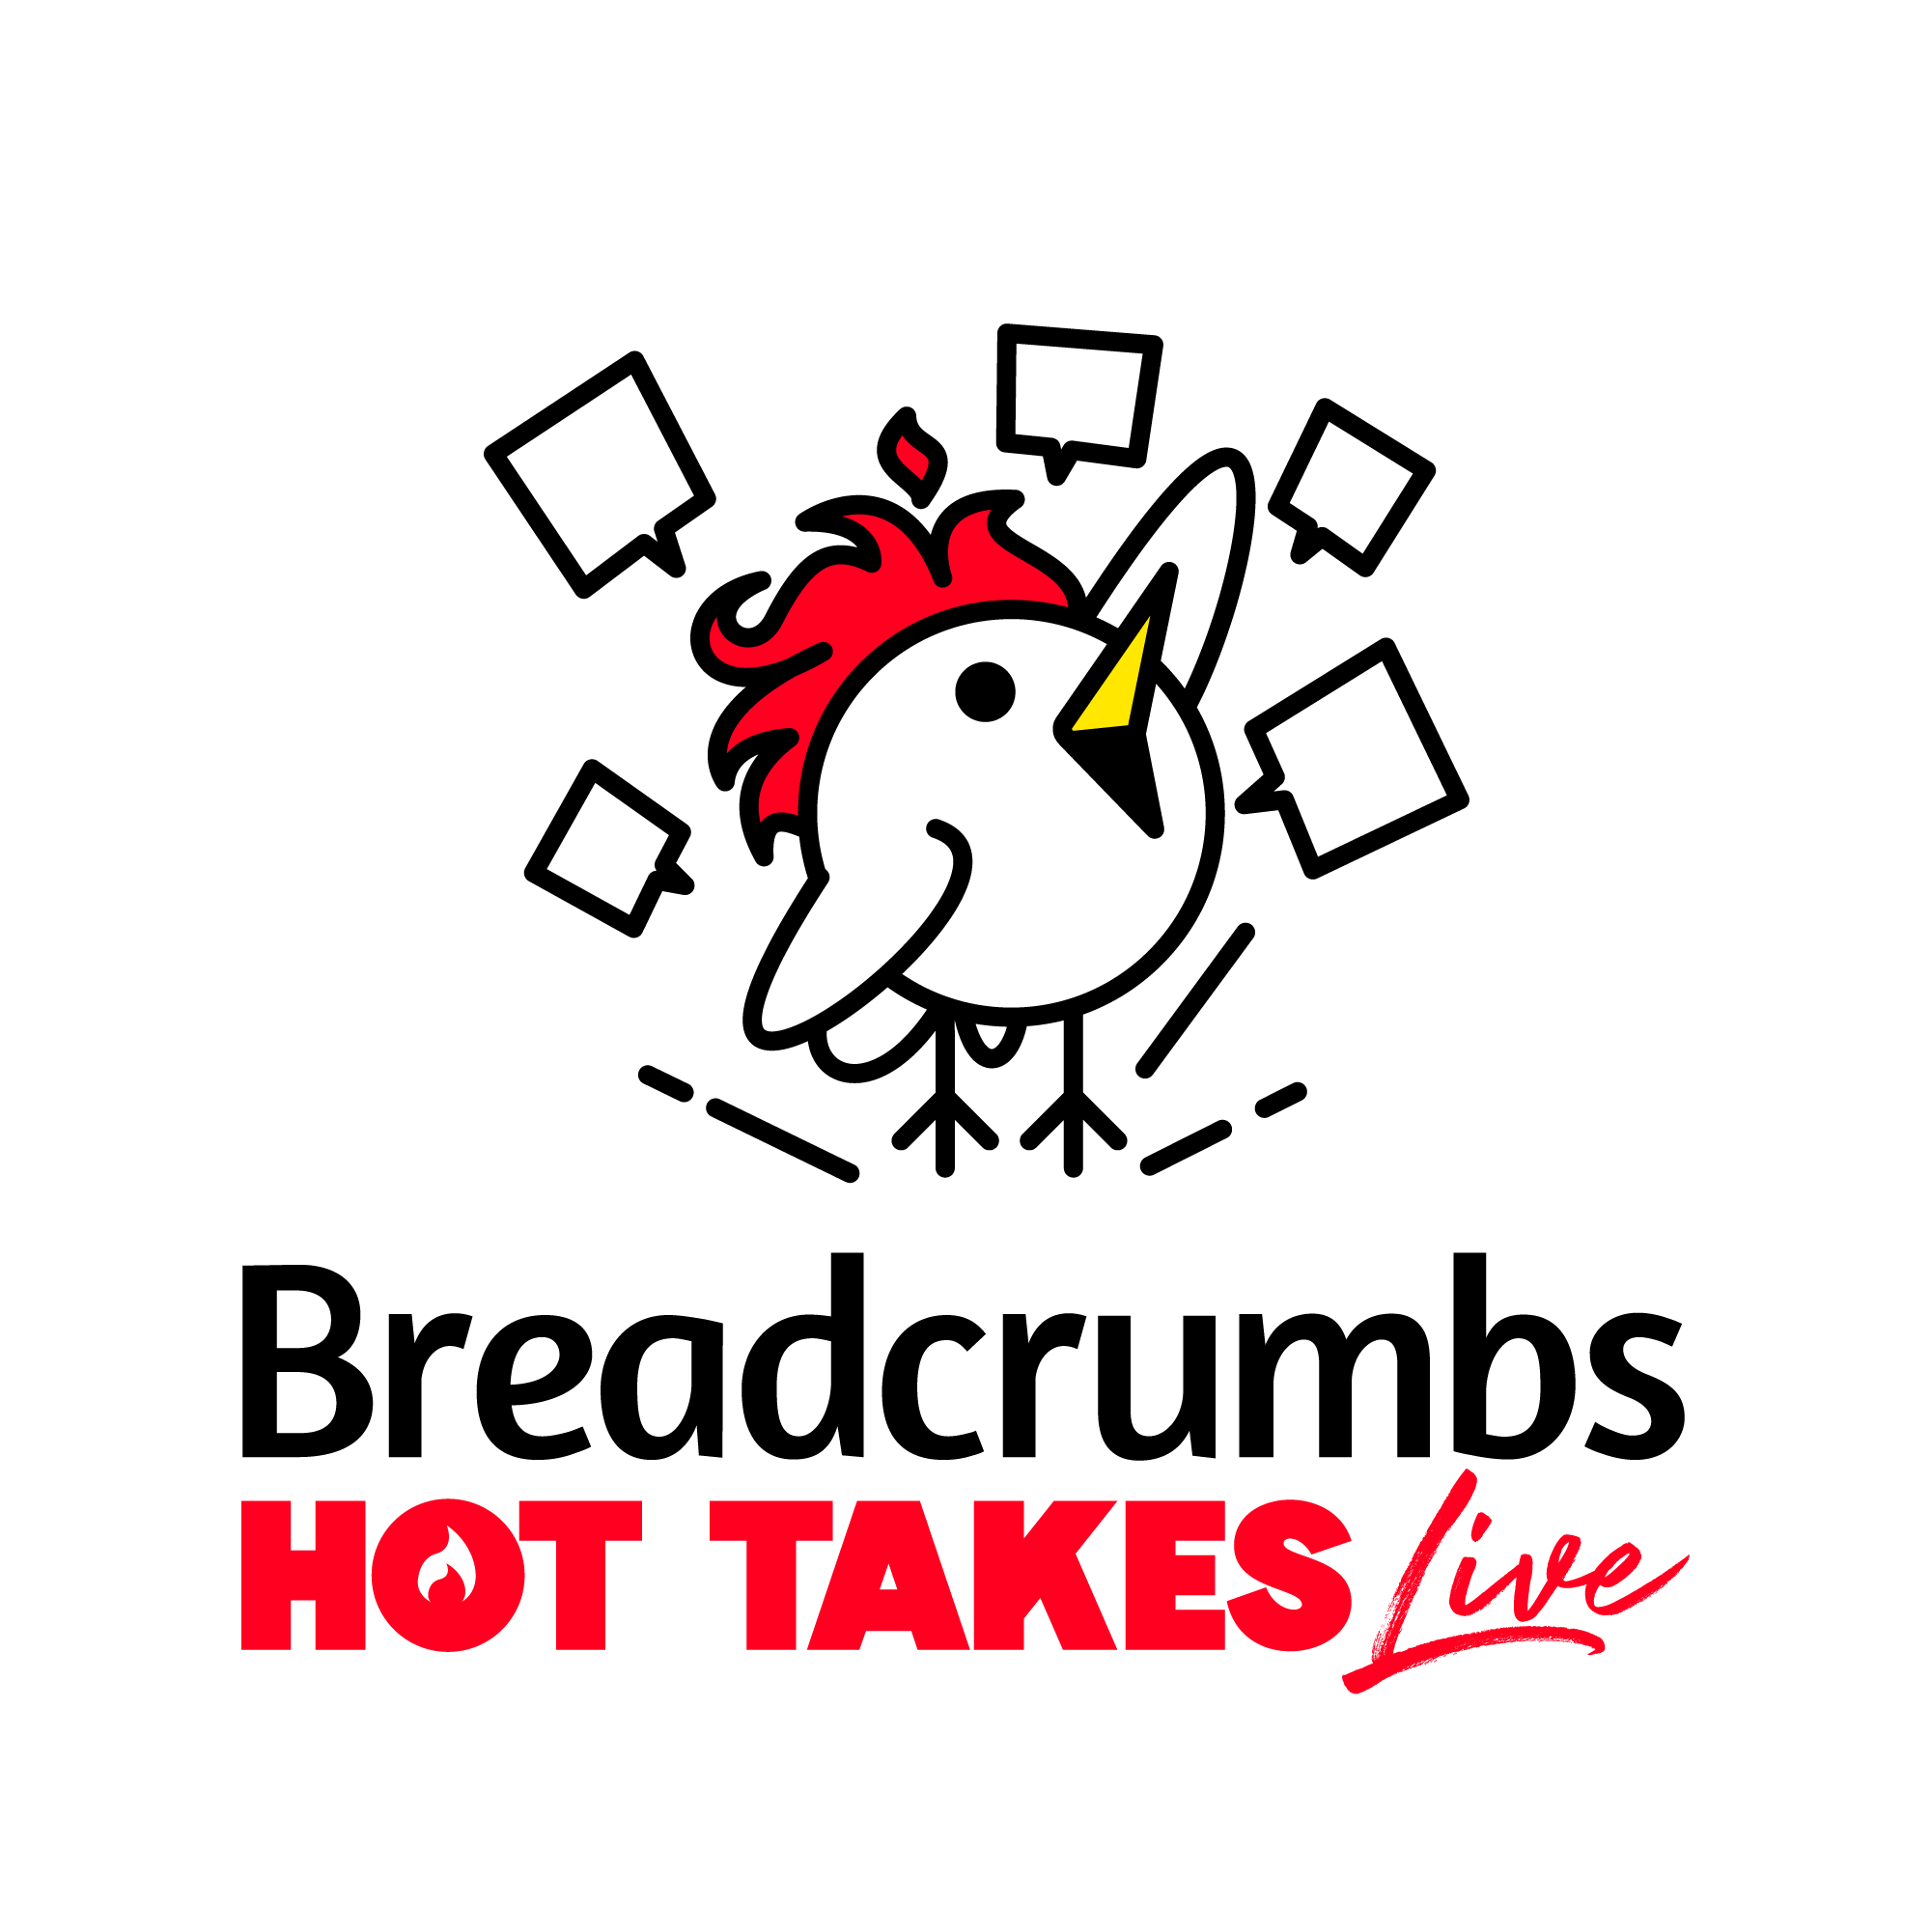 Hot Takes Live 48 speakers. Spicy opinions. Even spicier data.